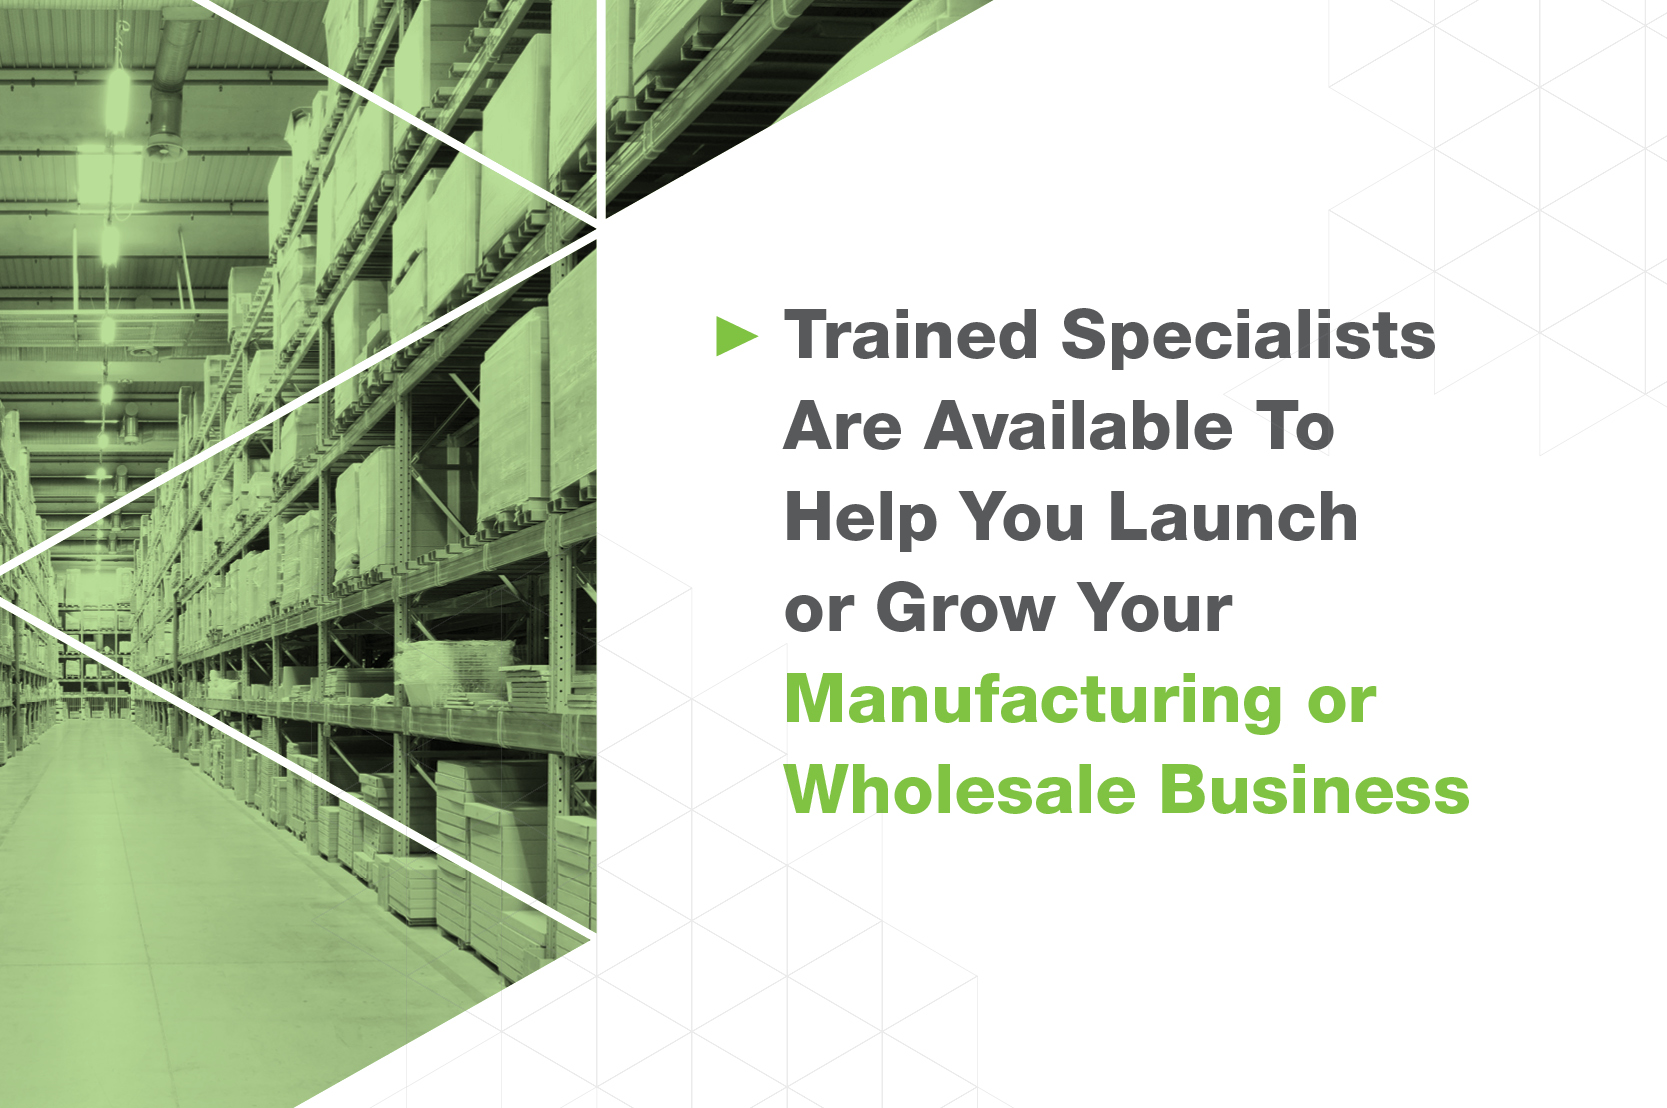 Trained specialists are available to help you launch or grow your industrial business.